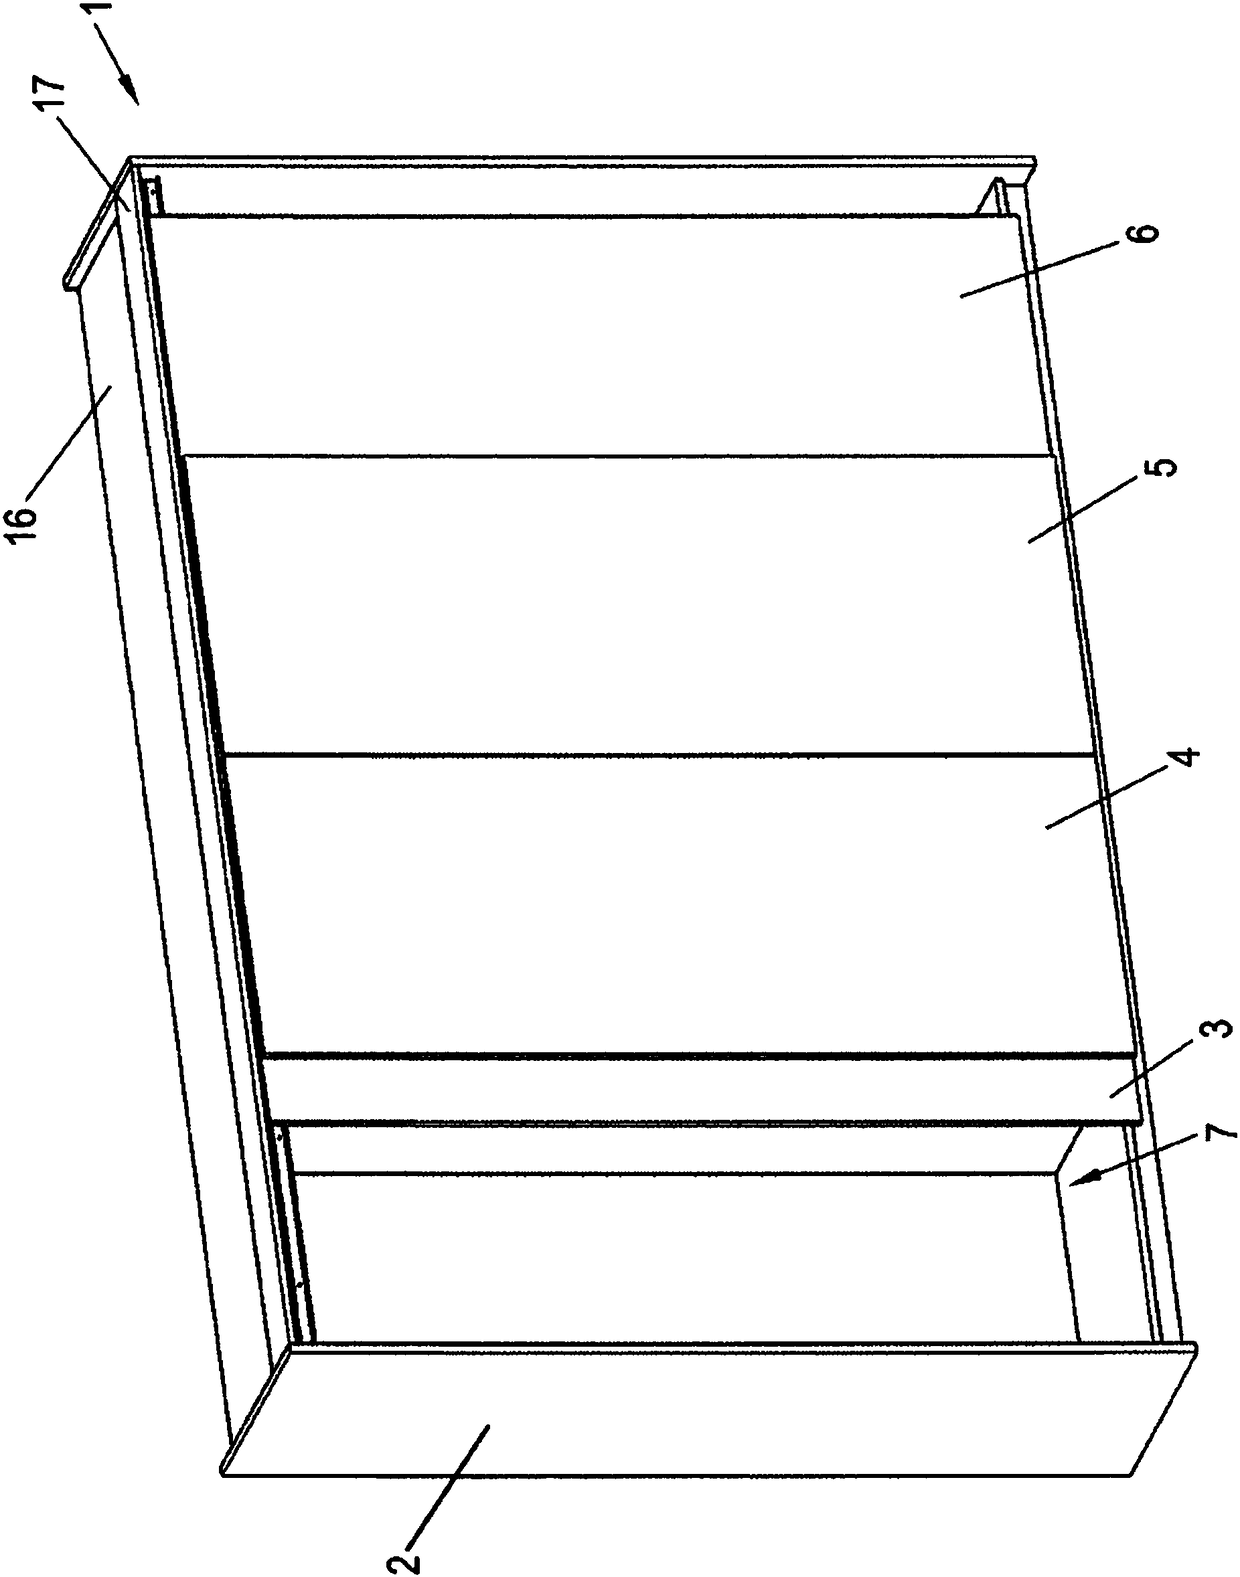 Guide assembly for sliding doors and cupboard unit